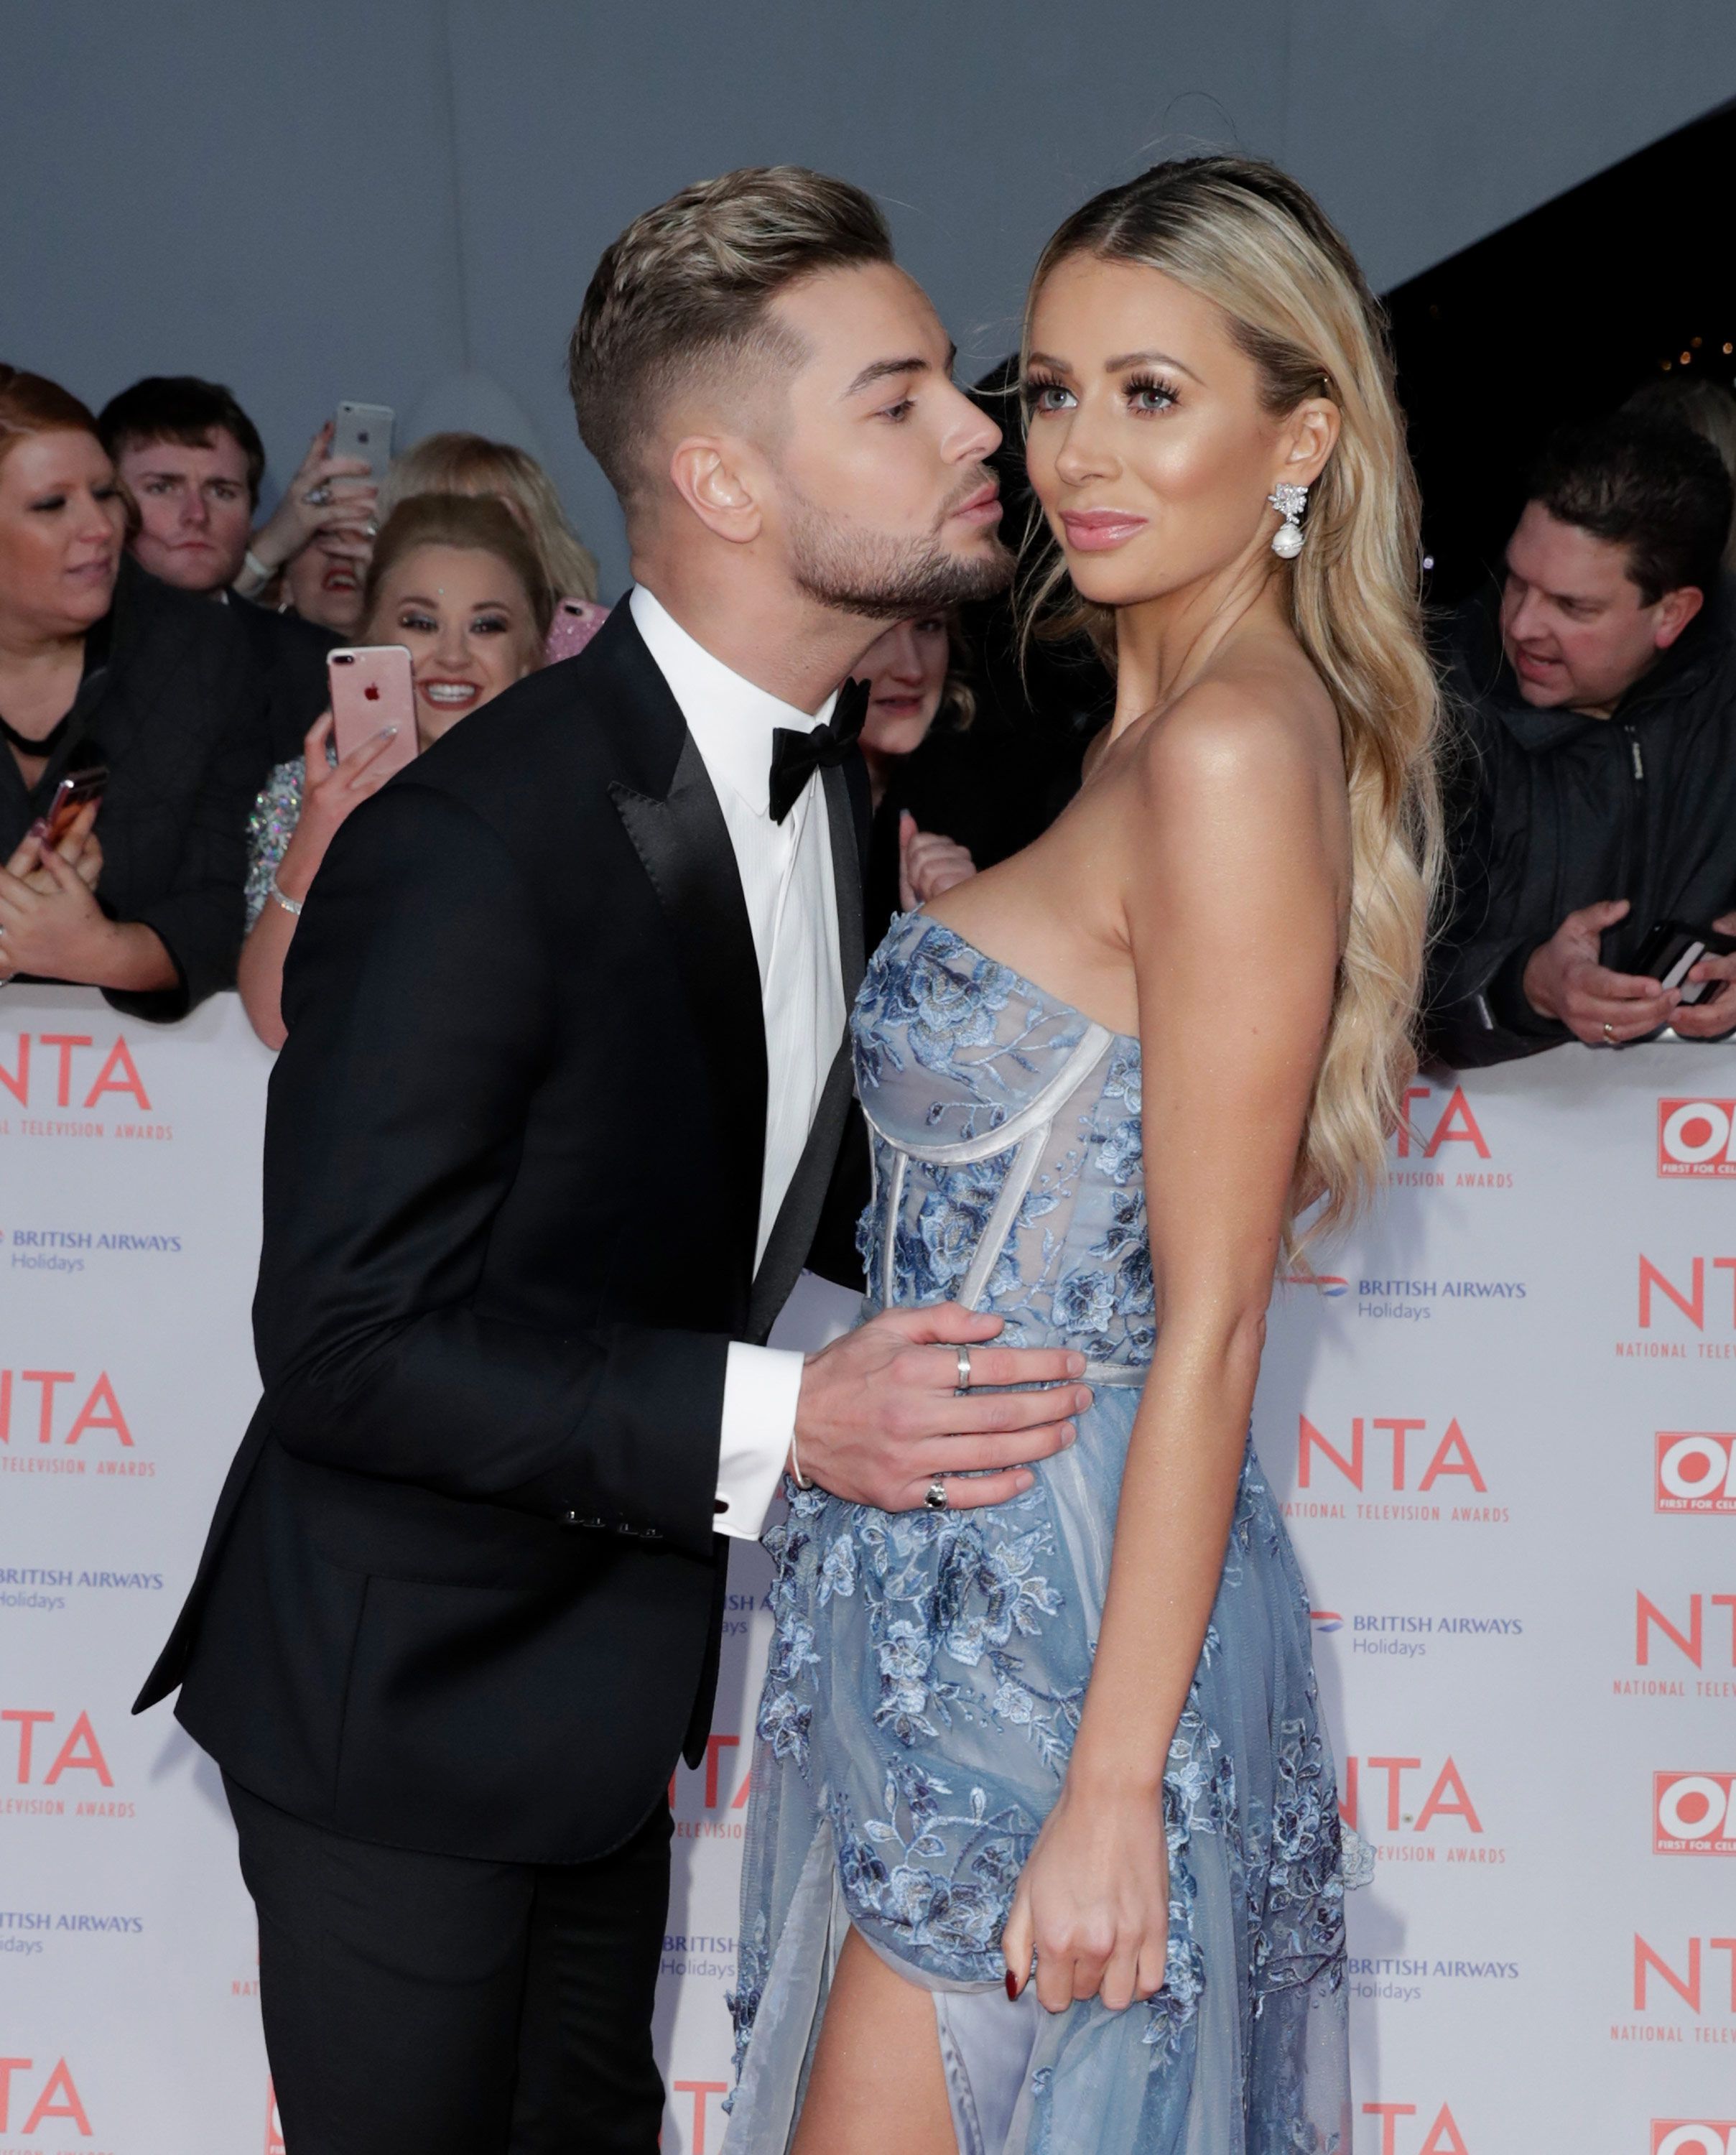 olivia atwood and chris hughes love island couples